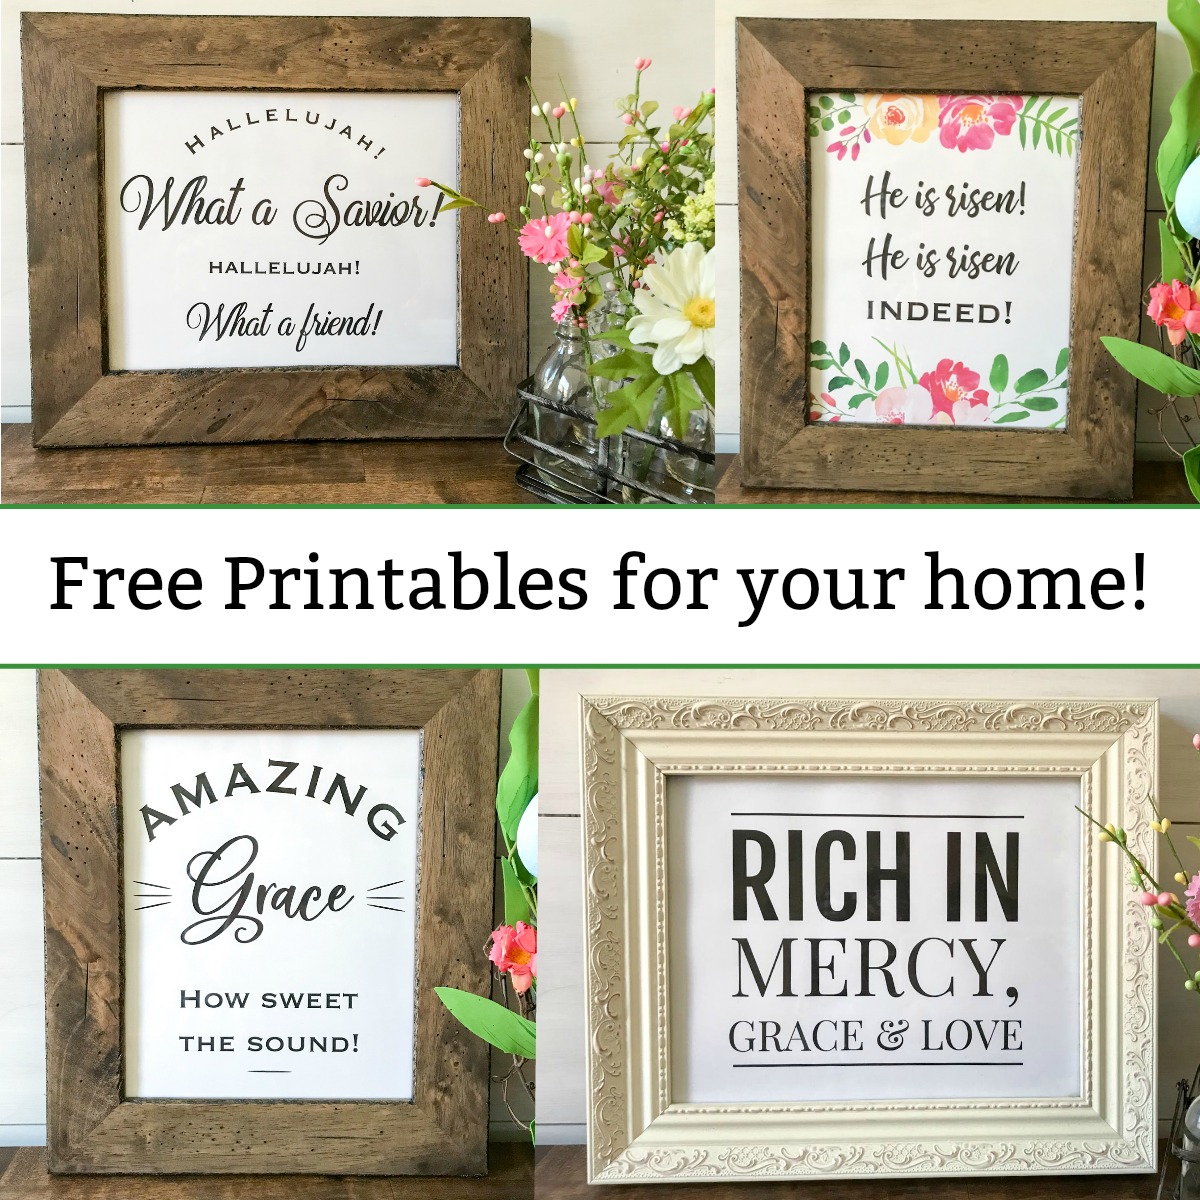 Free printables for your home, with 4 inspirational designs!